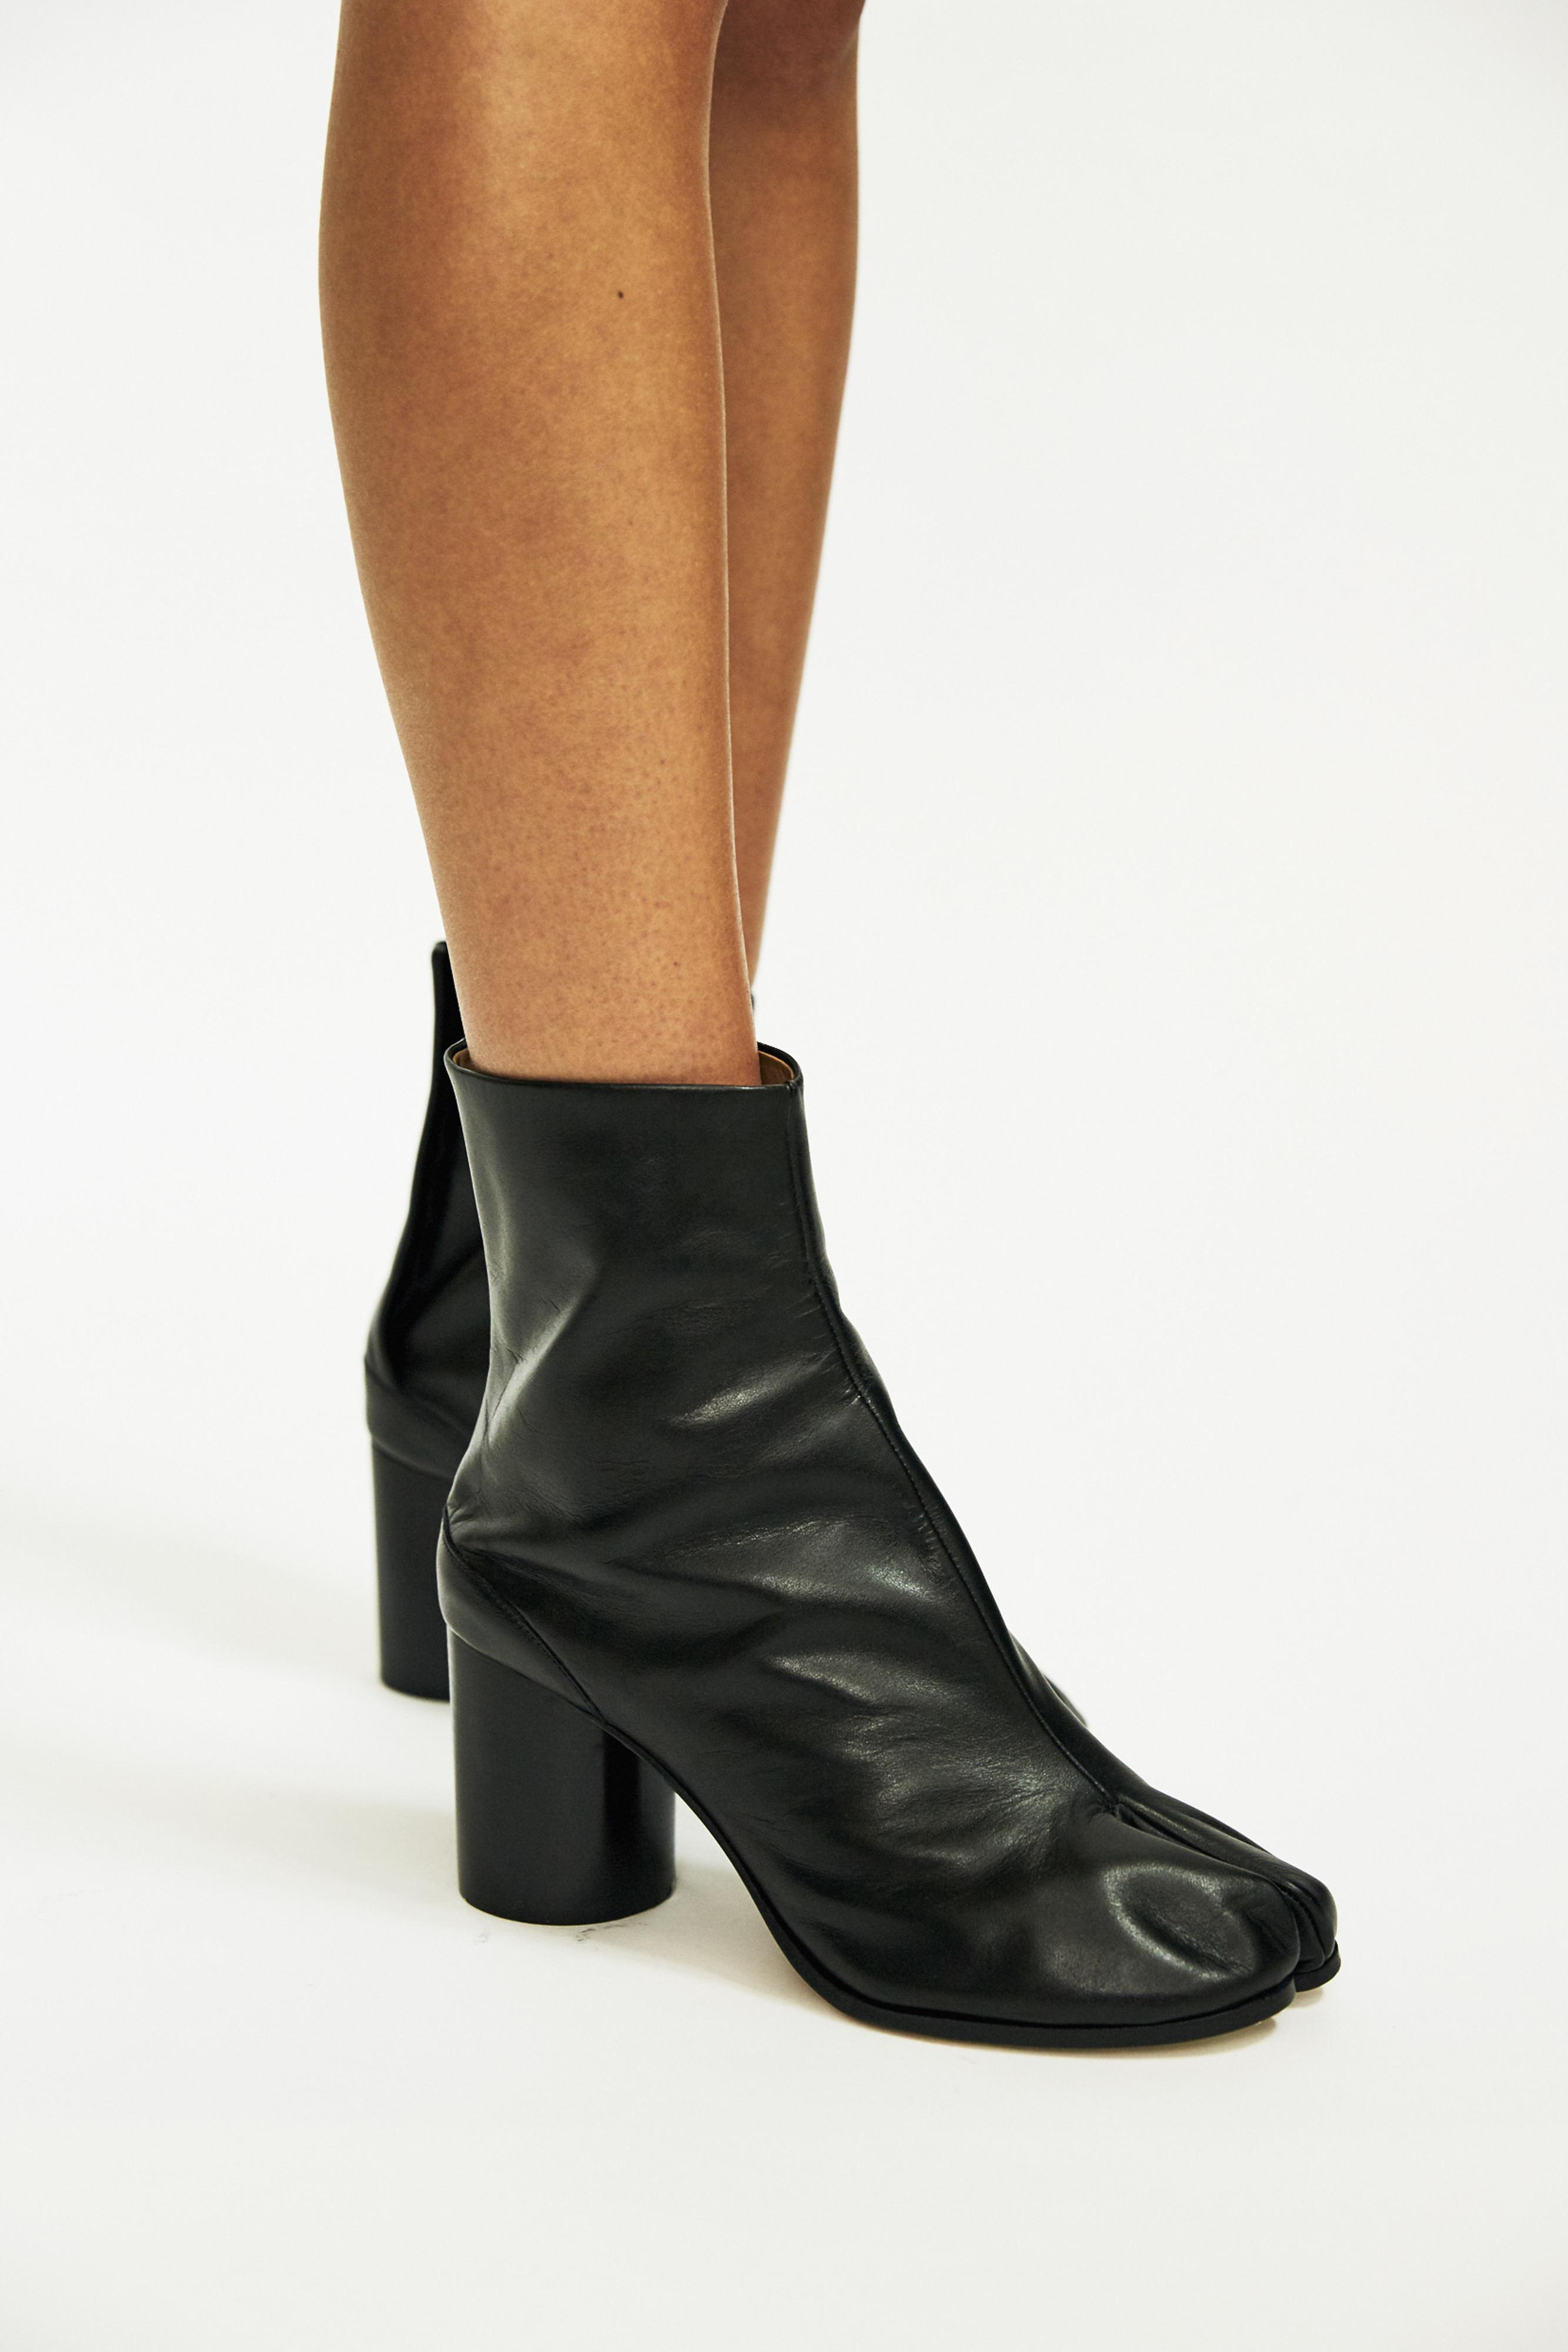 Maison Margiela Leather Tabi Ankle Boots in Black | Lyst